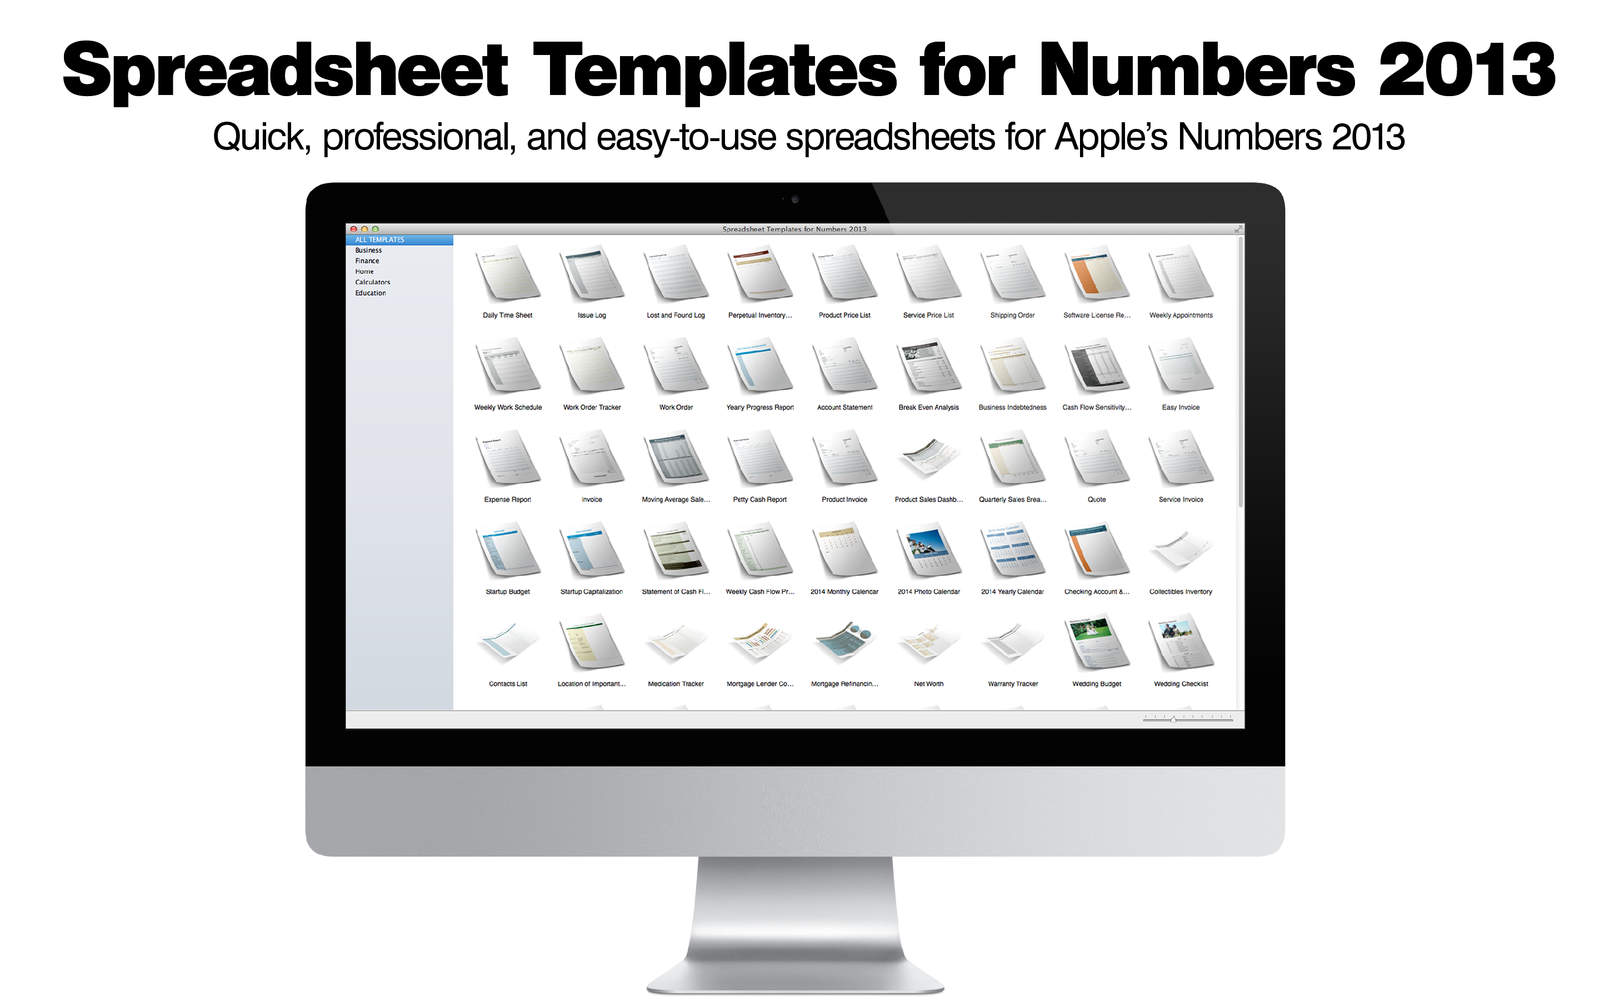 Spreadsheet Templates for Numbers 2013 1.0 : Main Window